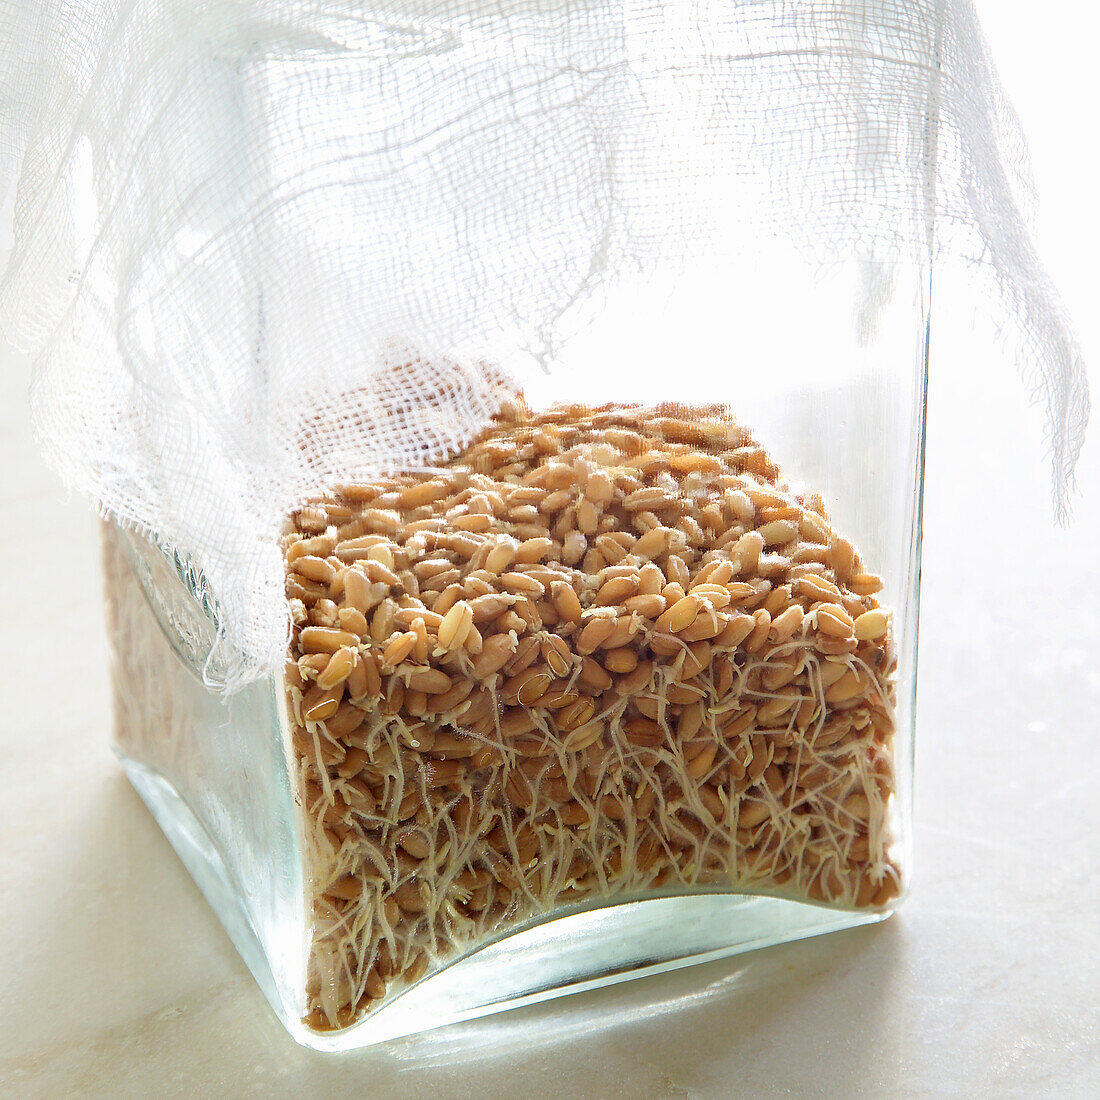 Sprouted wheat